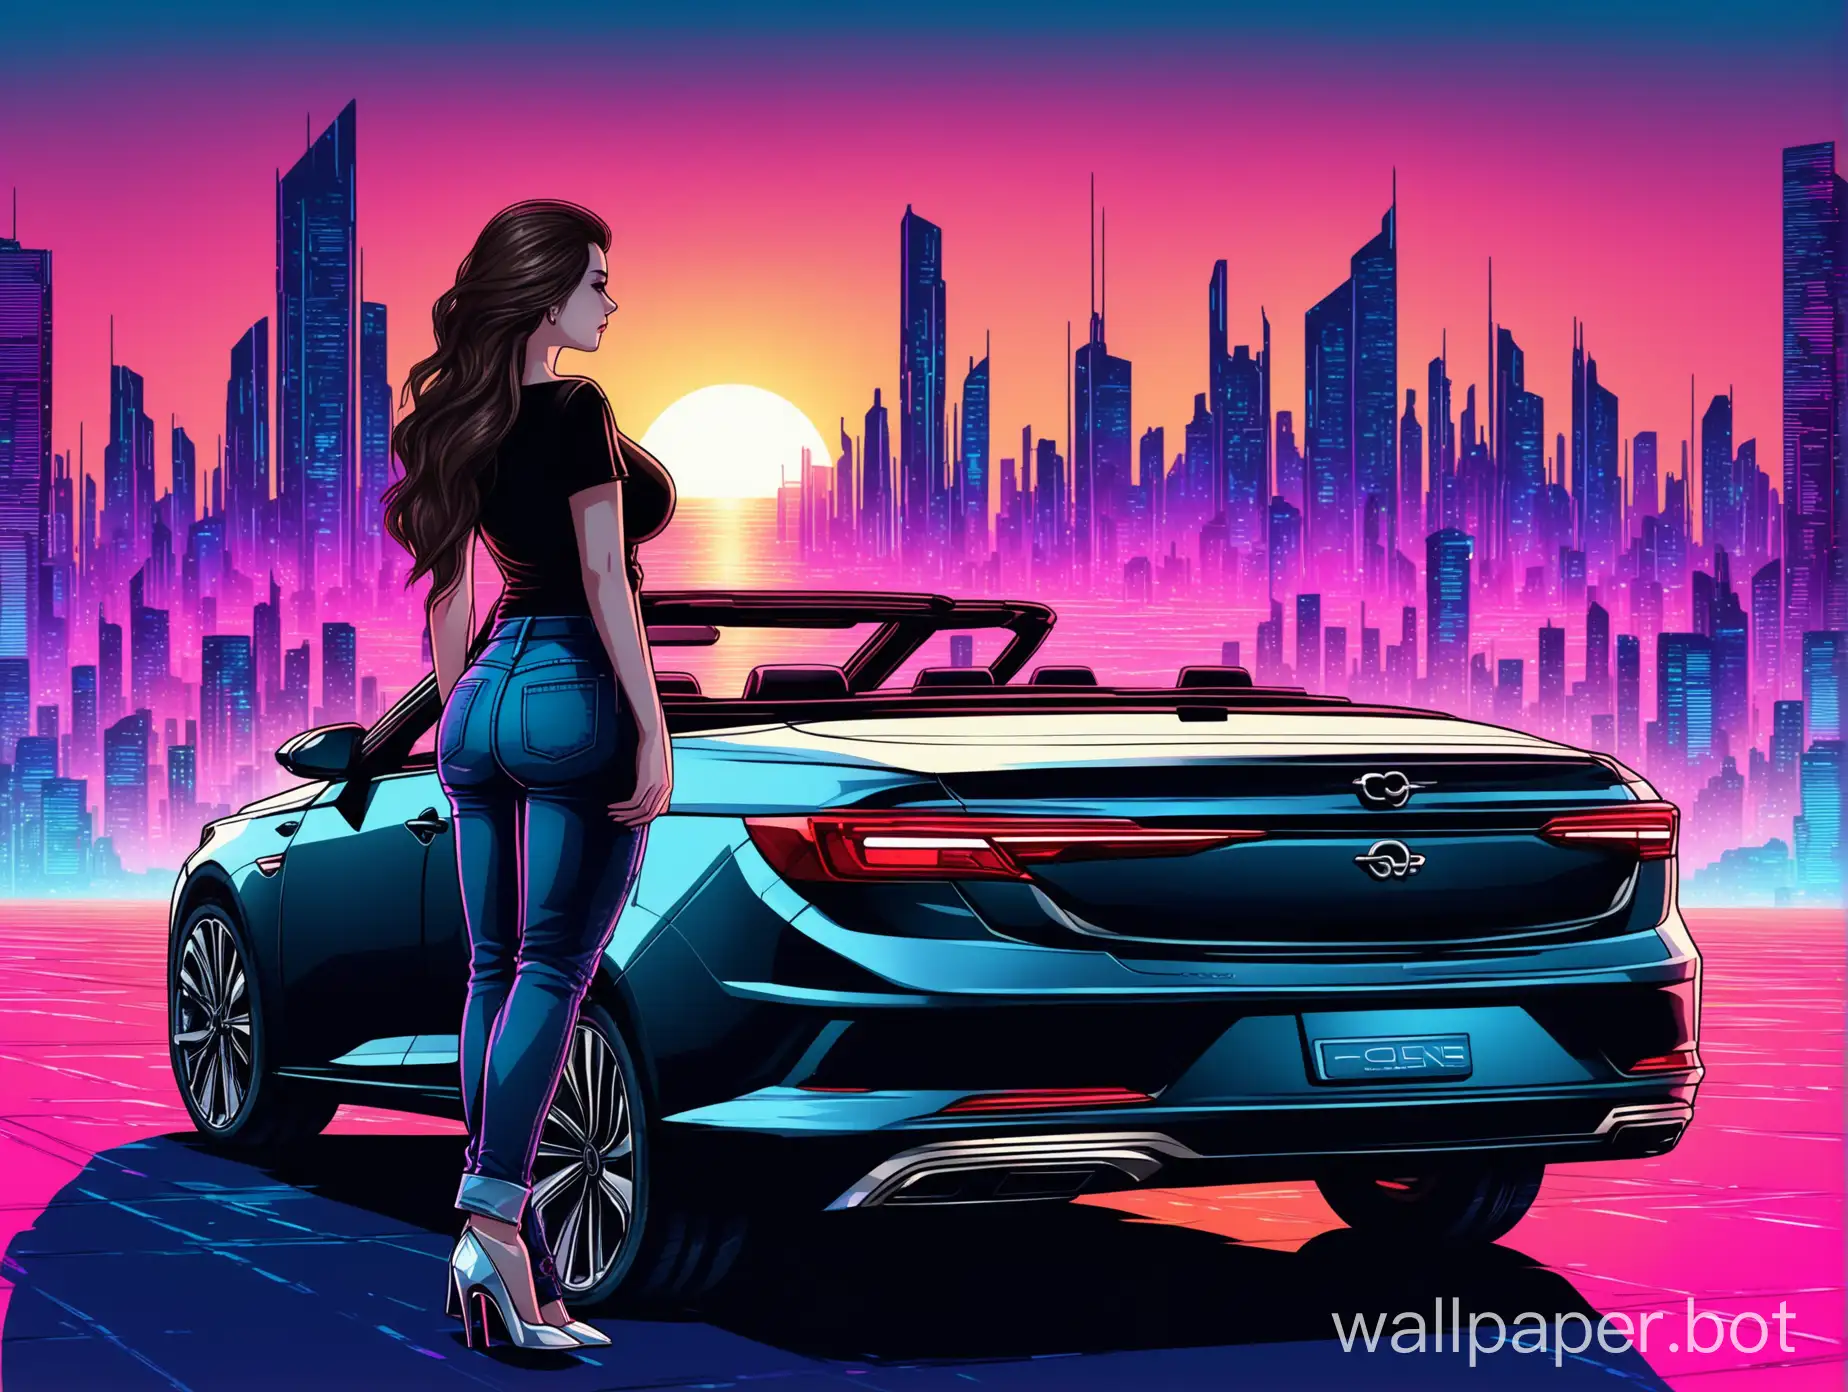 fuller shape woman with long darkbrown hair visible from the back (her face isn't visible), wearing black t-shirt with cleavage, jeans and high heels standing near the right side of a grey opel insignia grandsport convertible car visible from the side. background is a futuristic city at sunset, synthwave style